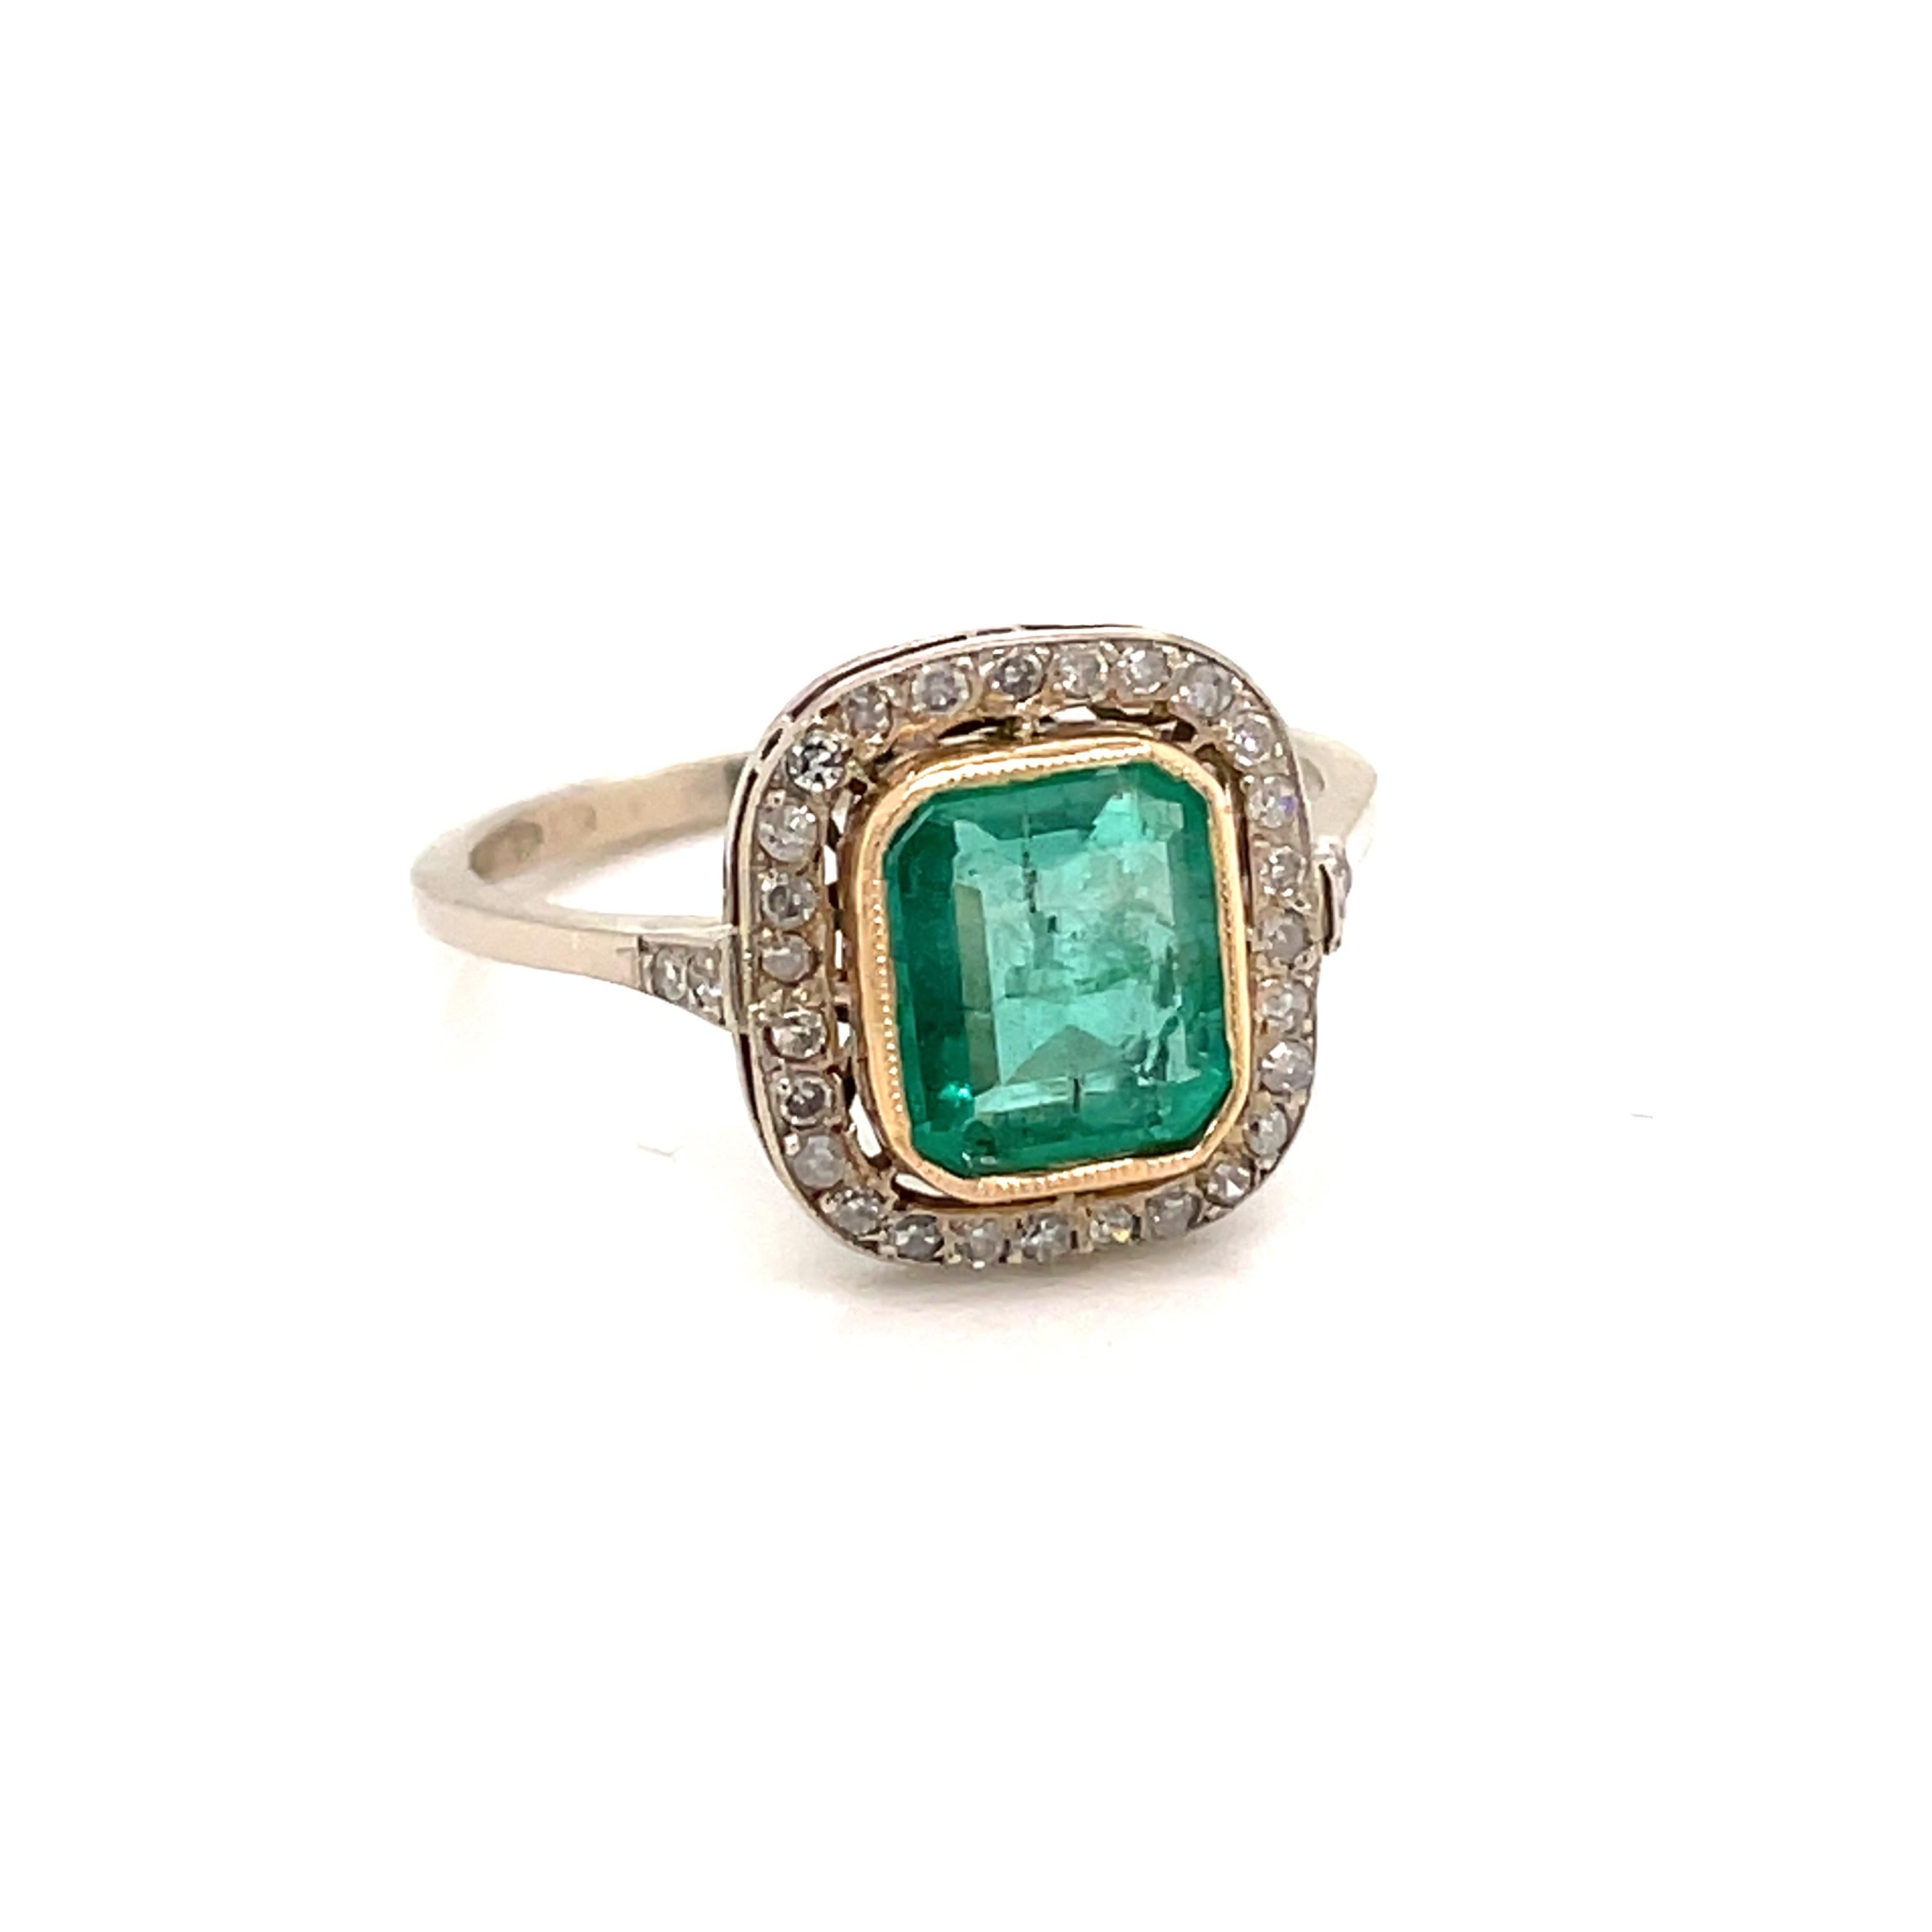 Art Deco Diamond Gold ring set in the center with one beautiful Colombian Emerald 1.50 ct and old mine cut Diamonds weighing 0.25 cts all together
Hallmarked. Entirely hand crafted, circa 1930

CONDITION: Pre Owned - Excellent
METAL: 18k Gold
GEM